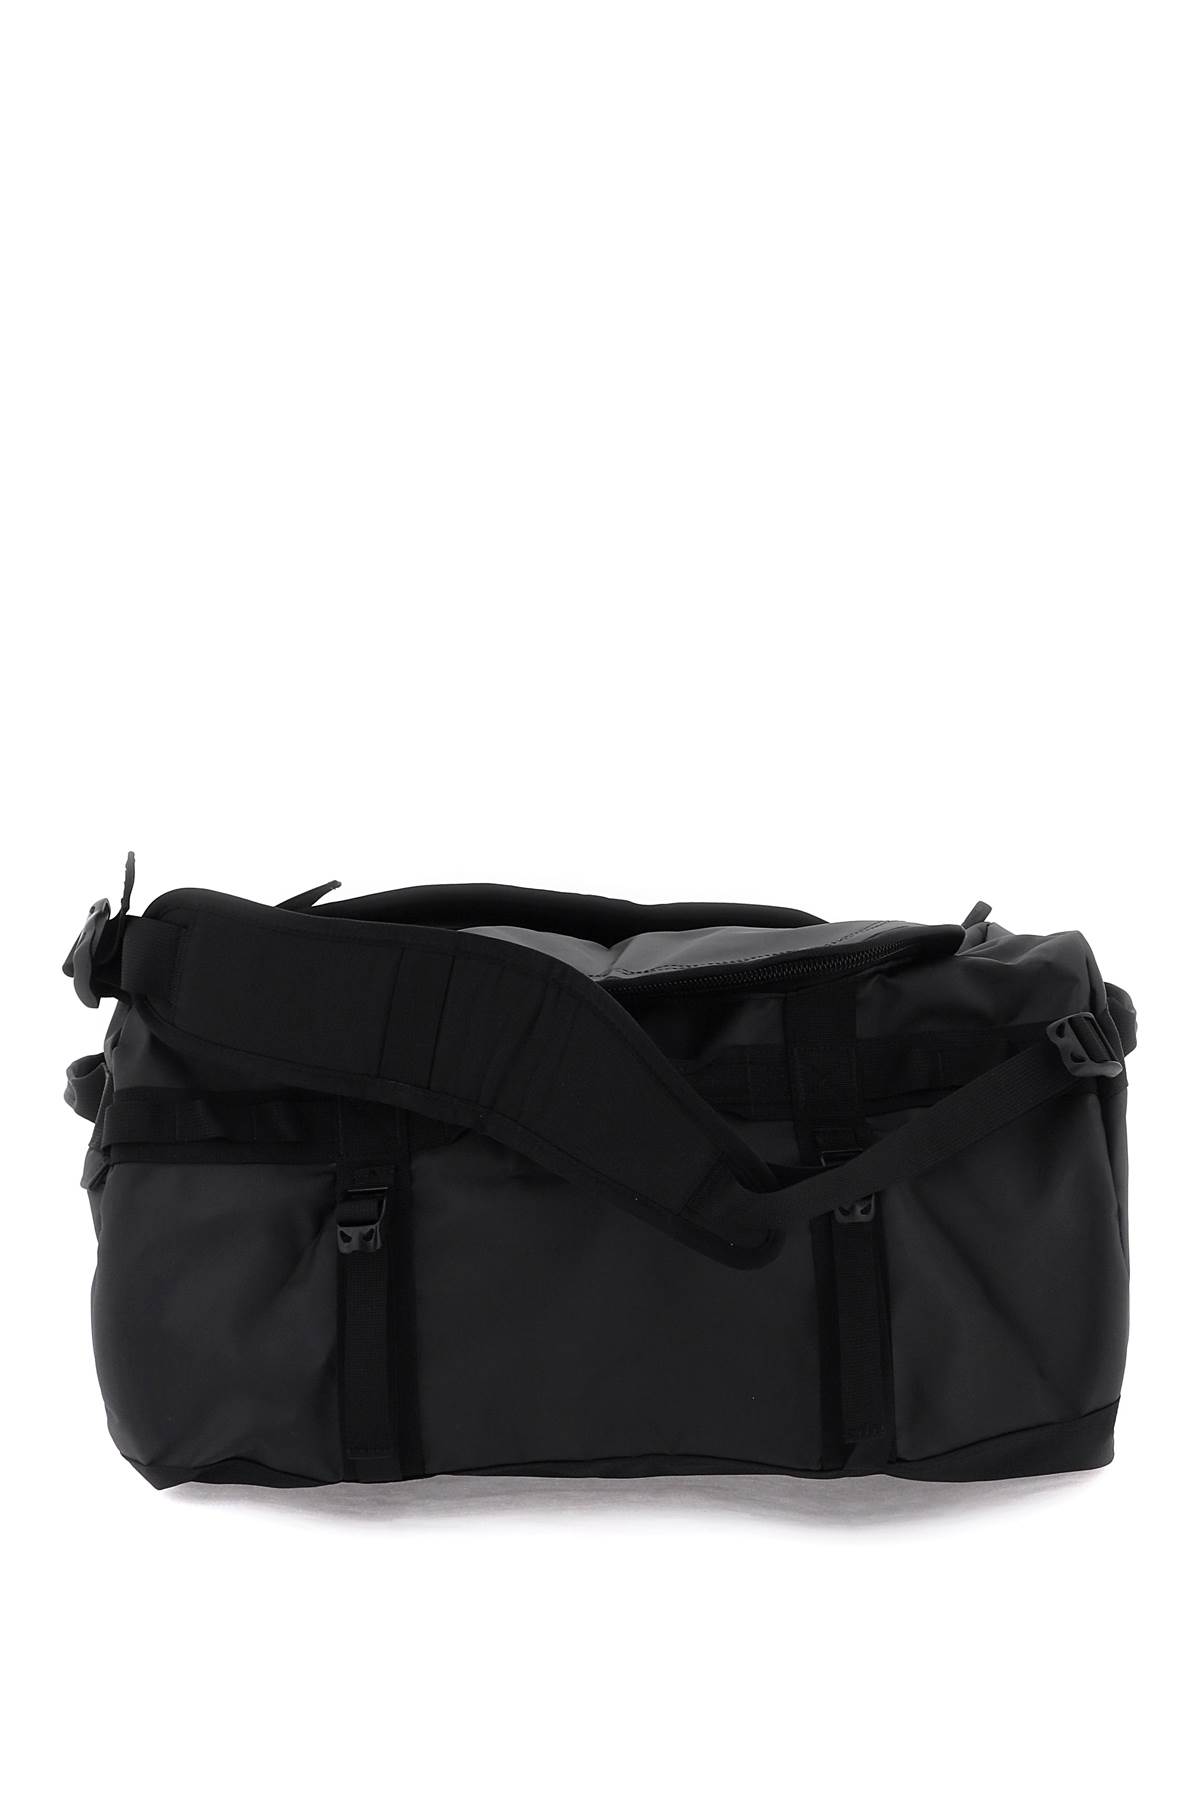 The North Face Small Base Camp Duffel Bag